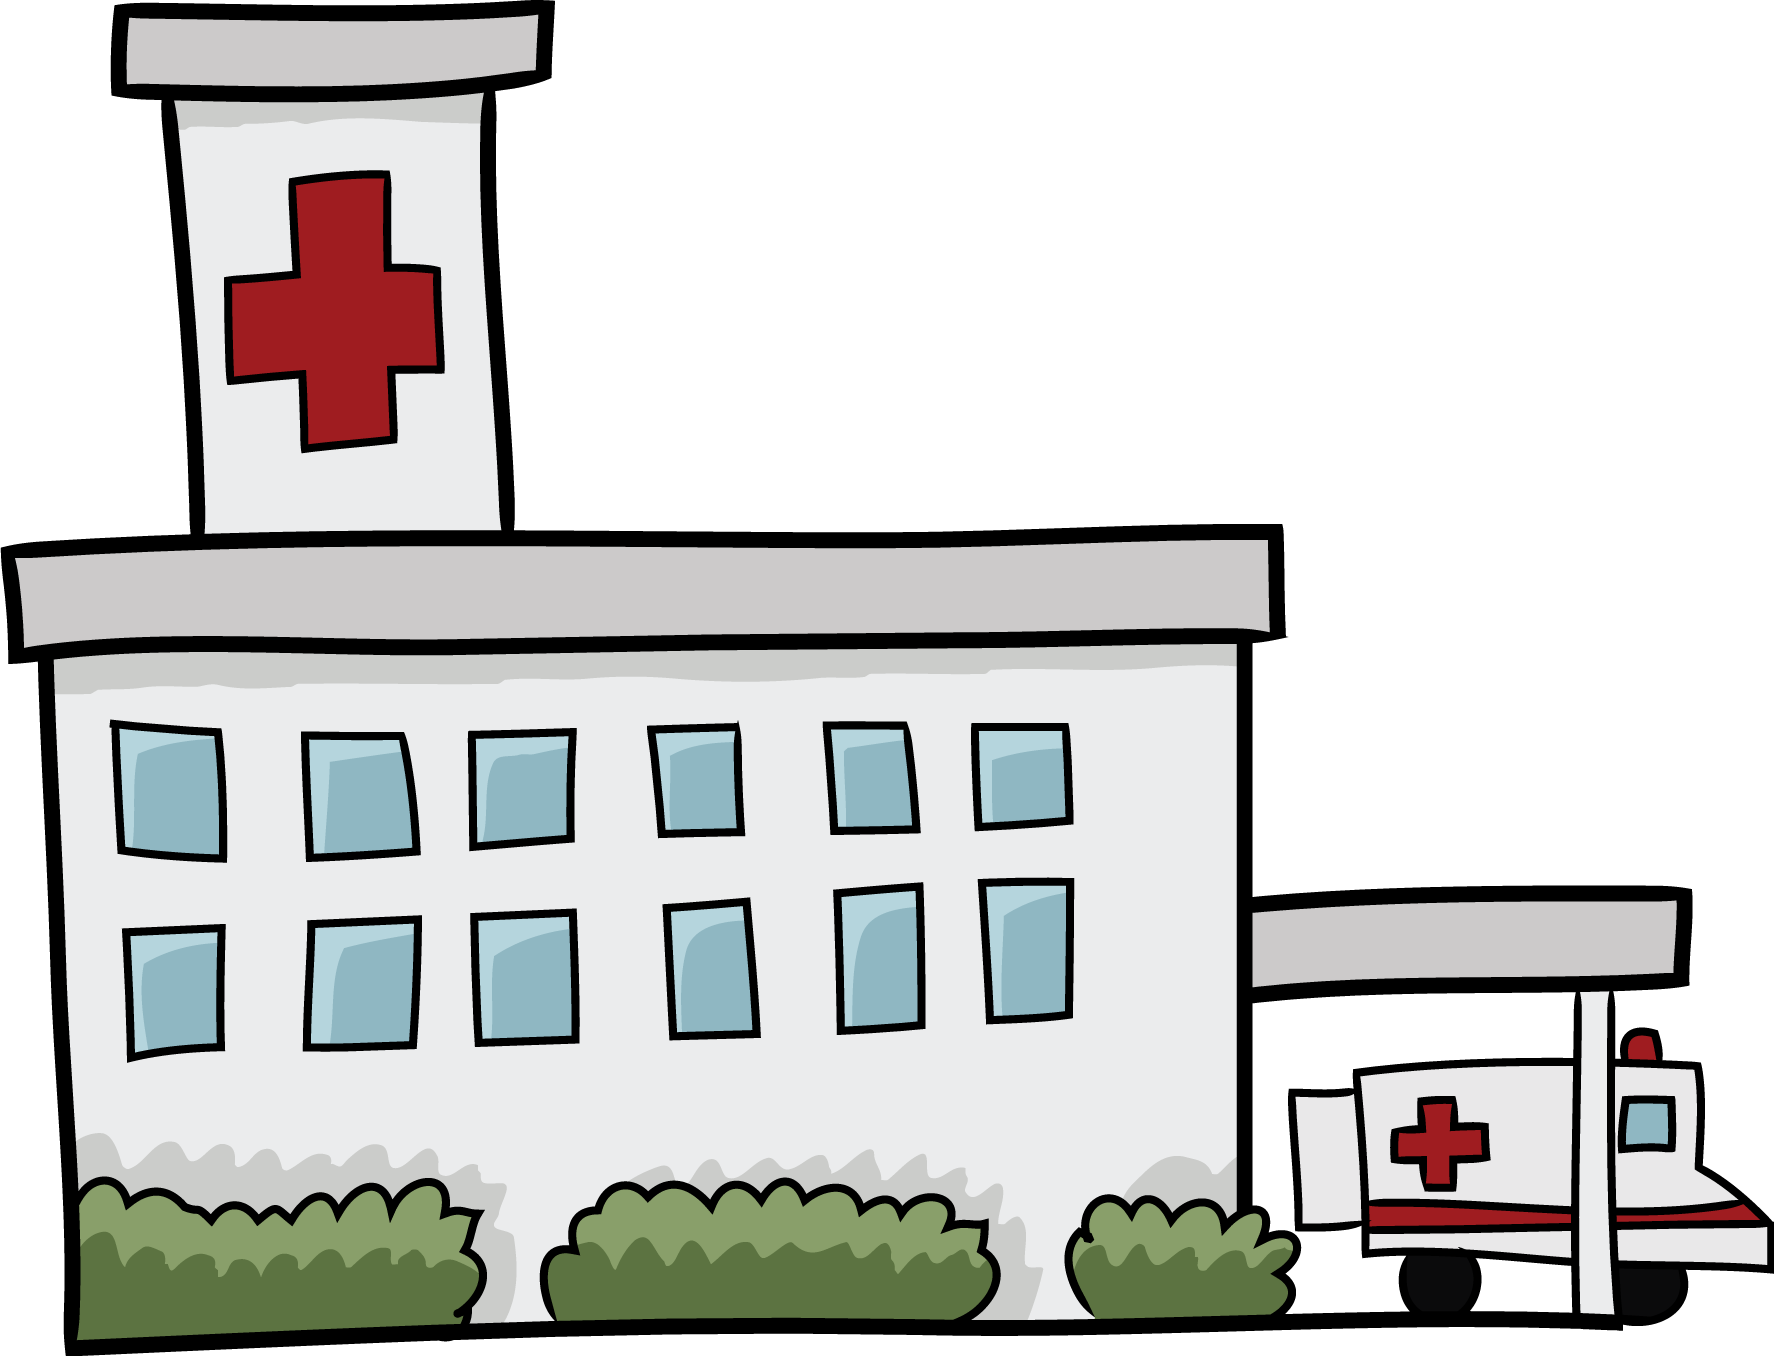 hospital building clip art black and white